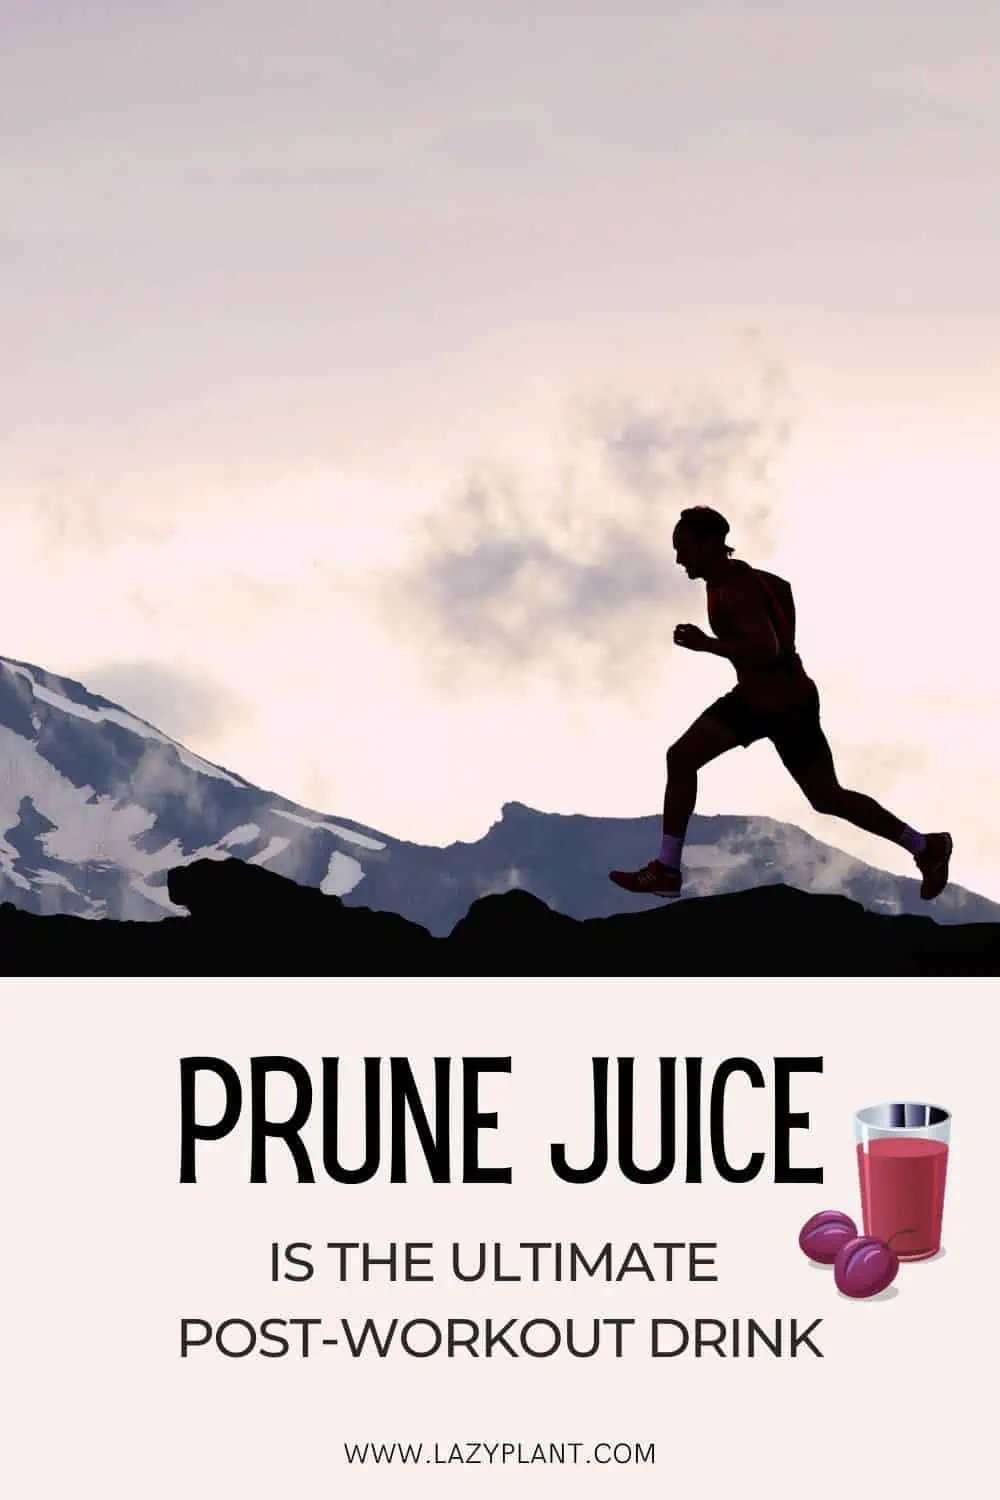 Benefits of drinking prune juice after exercise for athletic performance.